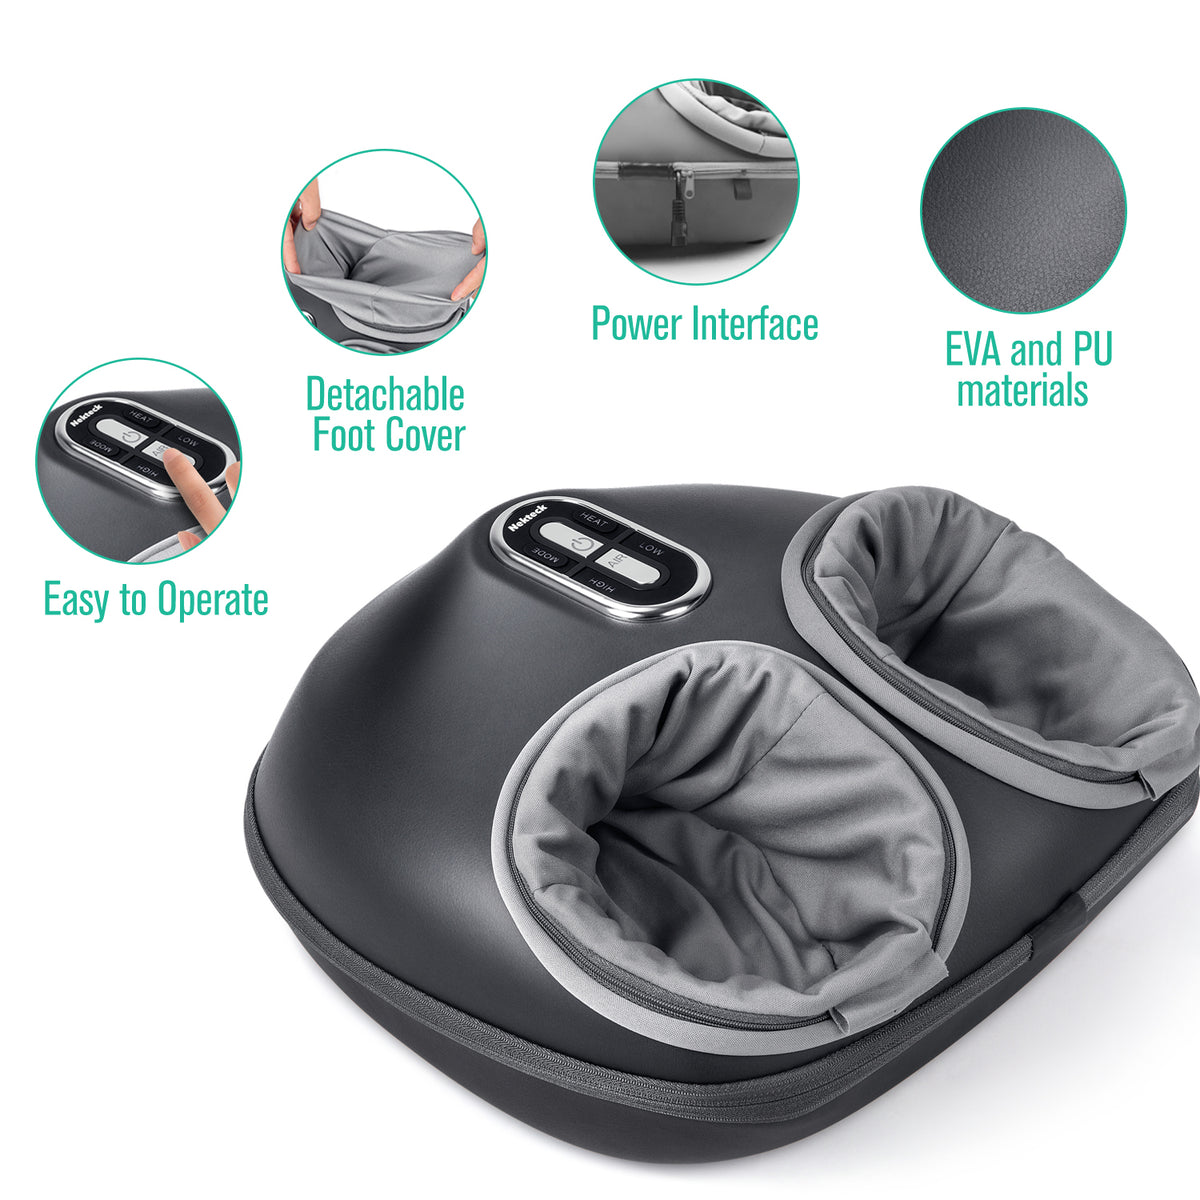 Nekteck Shiatsu Foot Massager Machine with Soothing Heat Deep Kneading Therapy Relieve Foot Pain and Improve Blood Circulation,Adjustable Intensity Relax for Home or Office Use Air Compression 